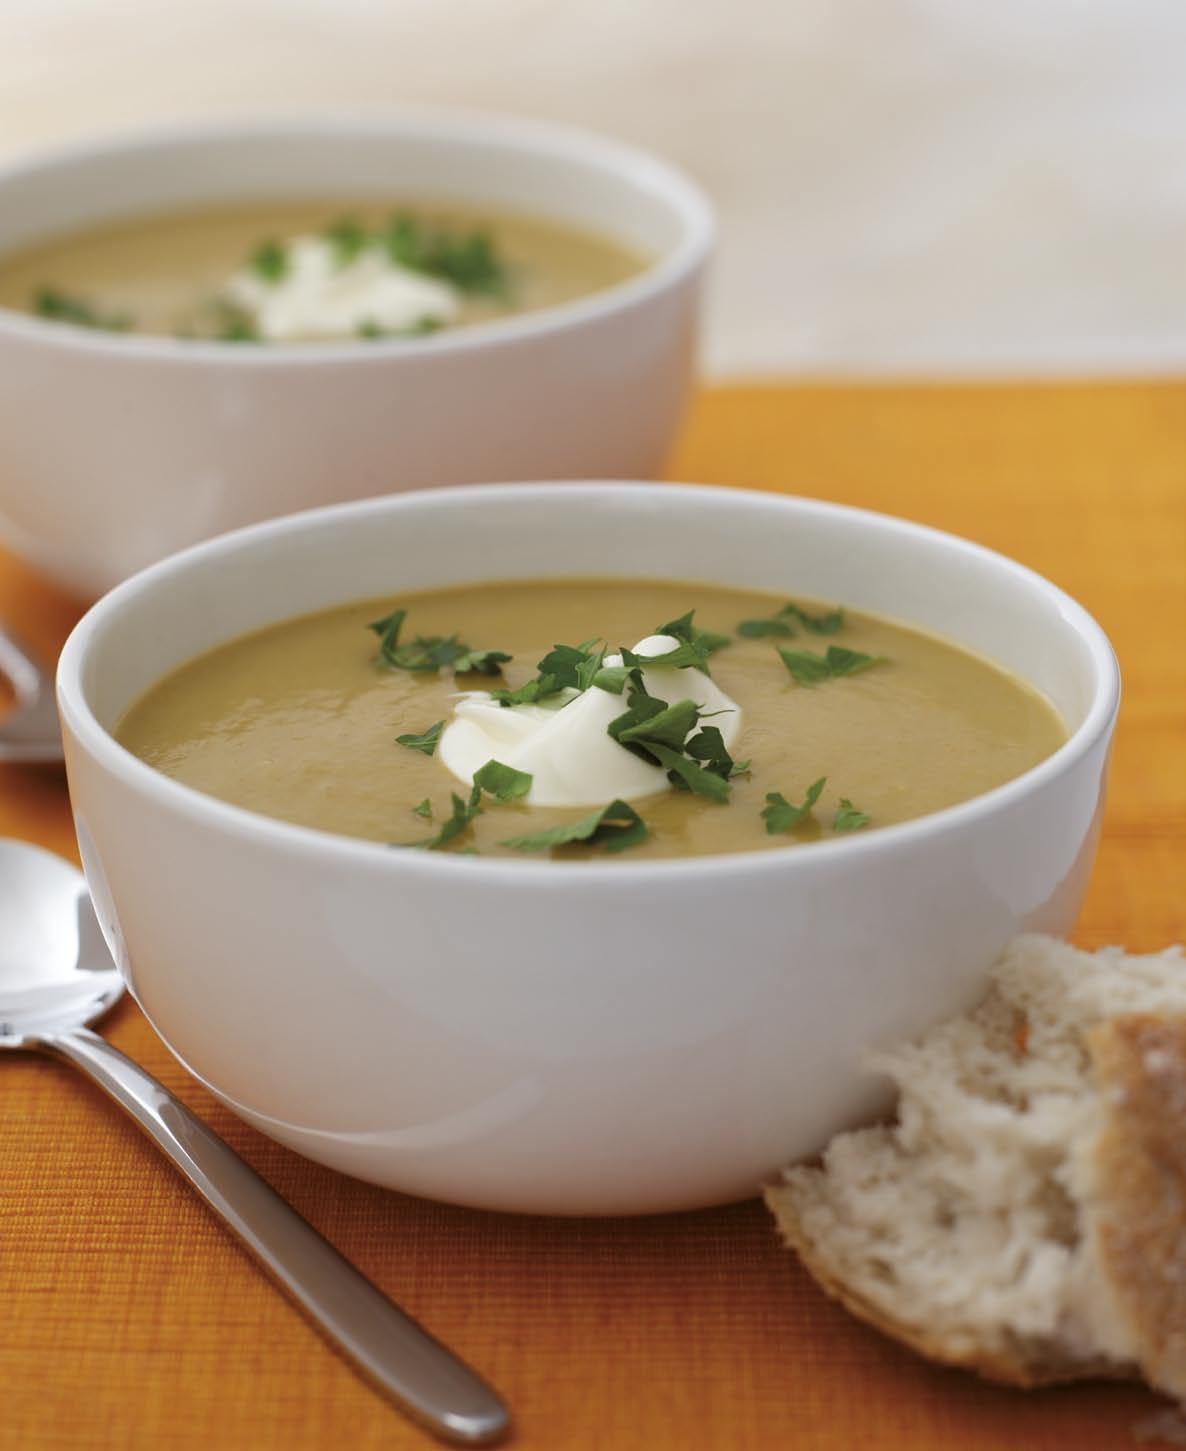 What's Cooking?: Curried parsnip soup